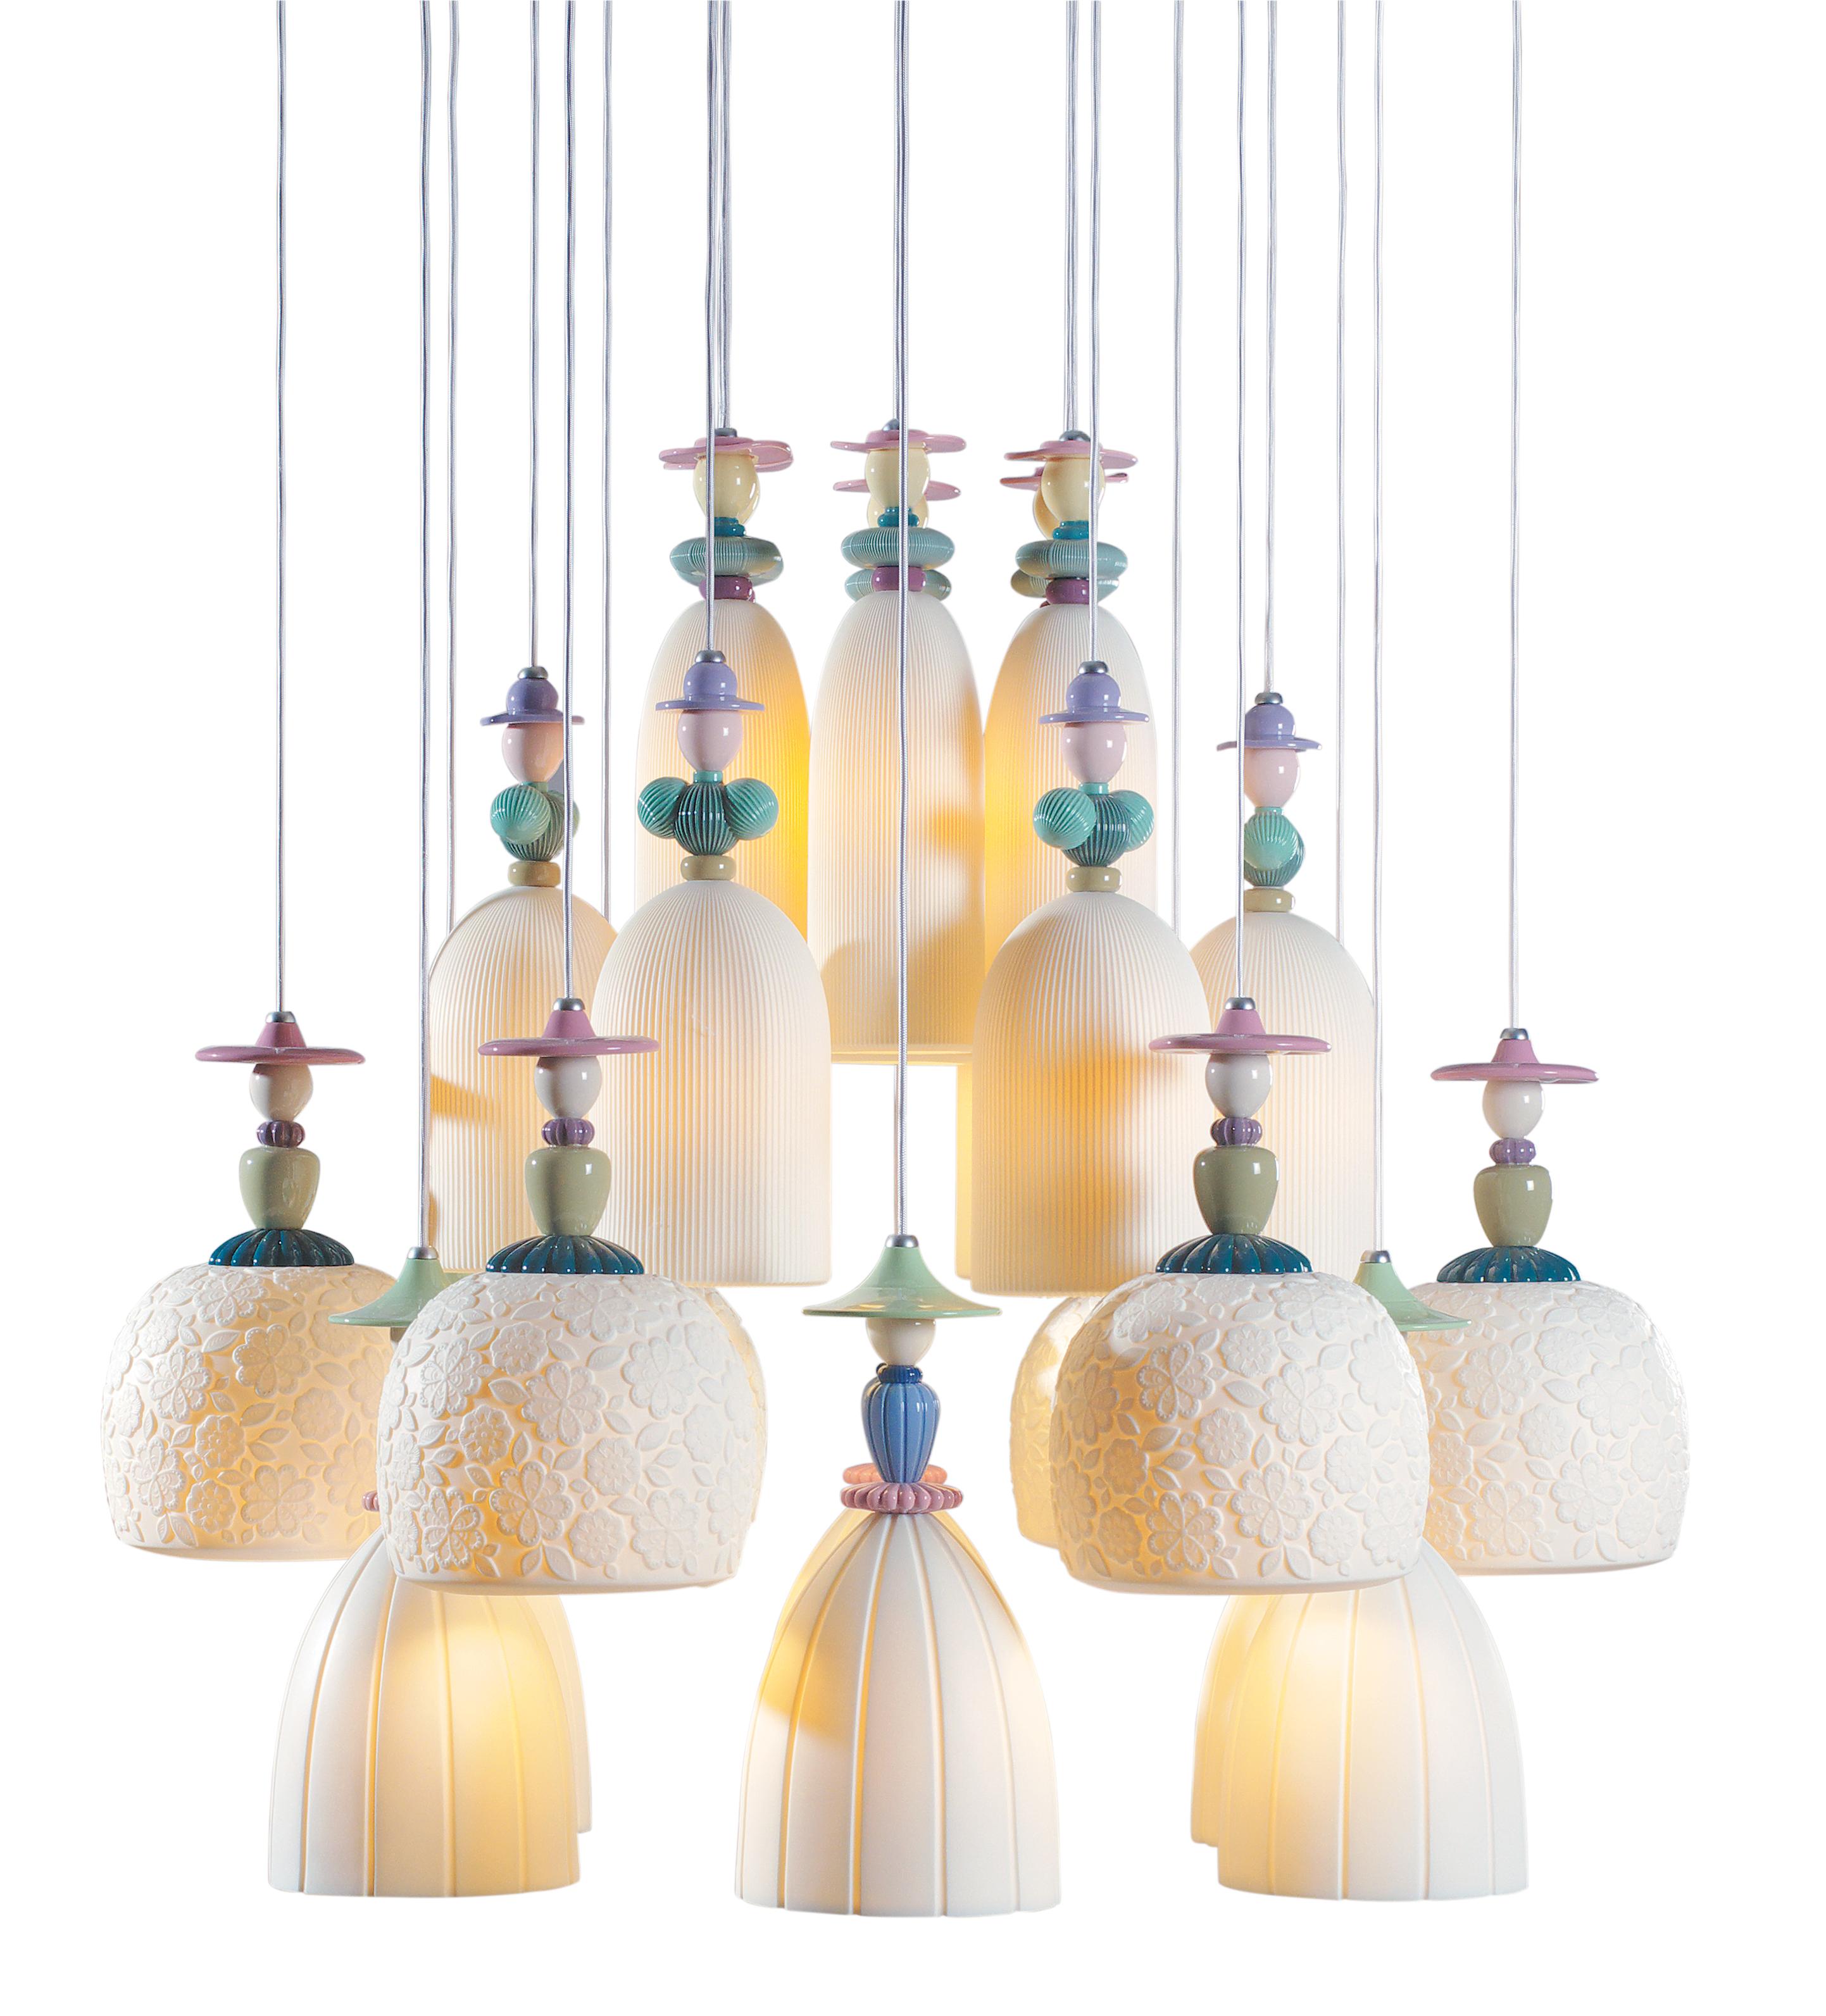 Handmade hanging ceiling lamp in brightly colored porcelain and floral decorations with twenty-four engraved translucent white porcelain tulips. The Mademoiselle collection is inspired by Lladró's romantic ladies, one of his most traditional motifs,